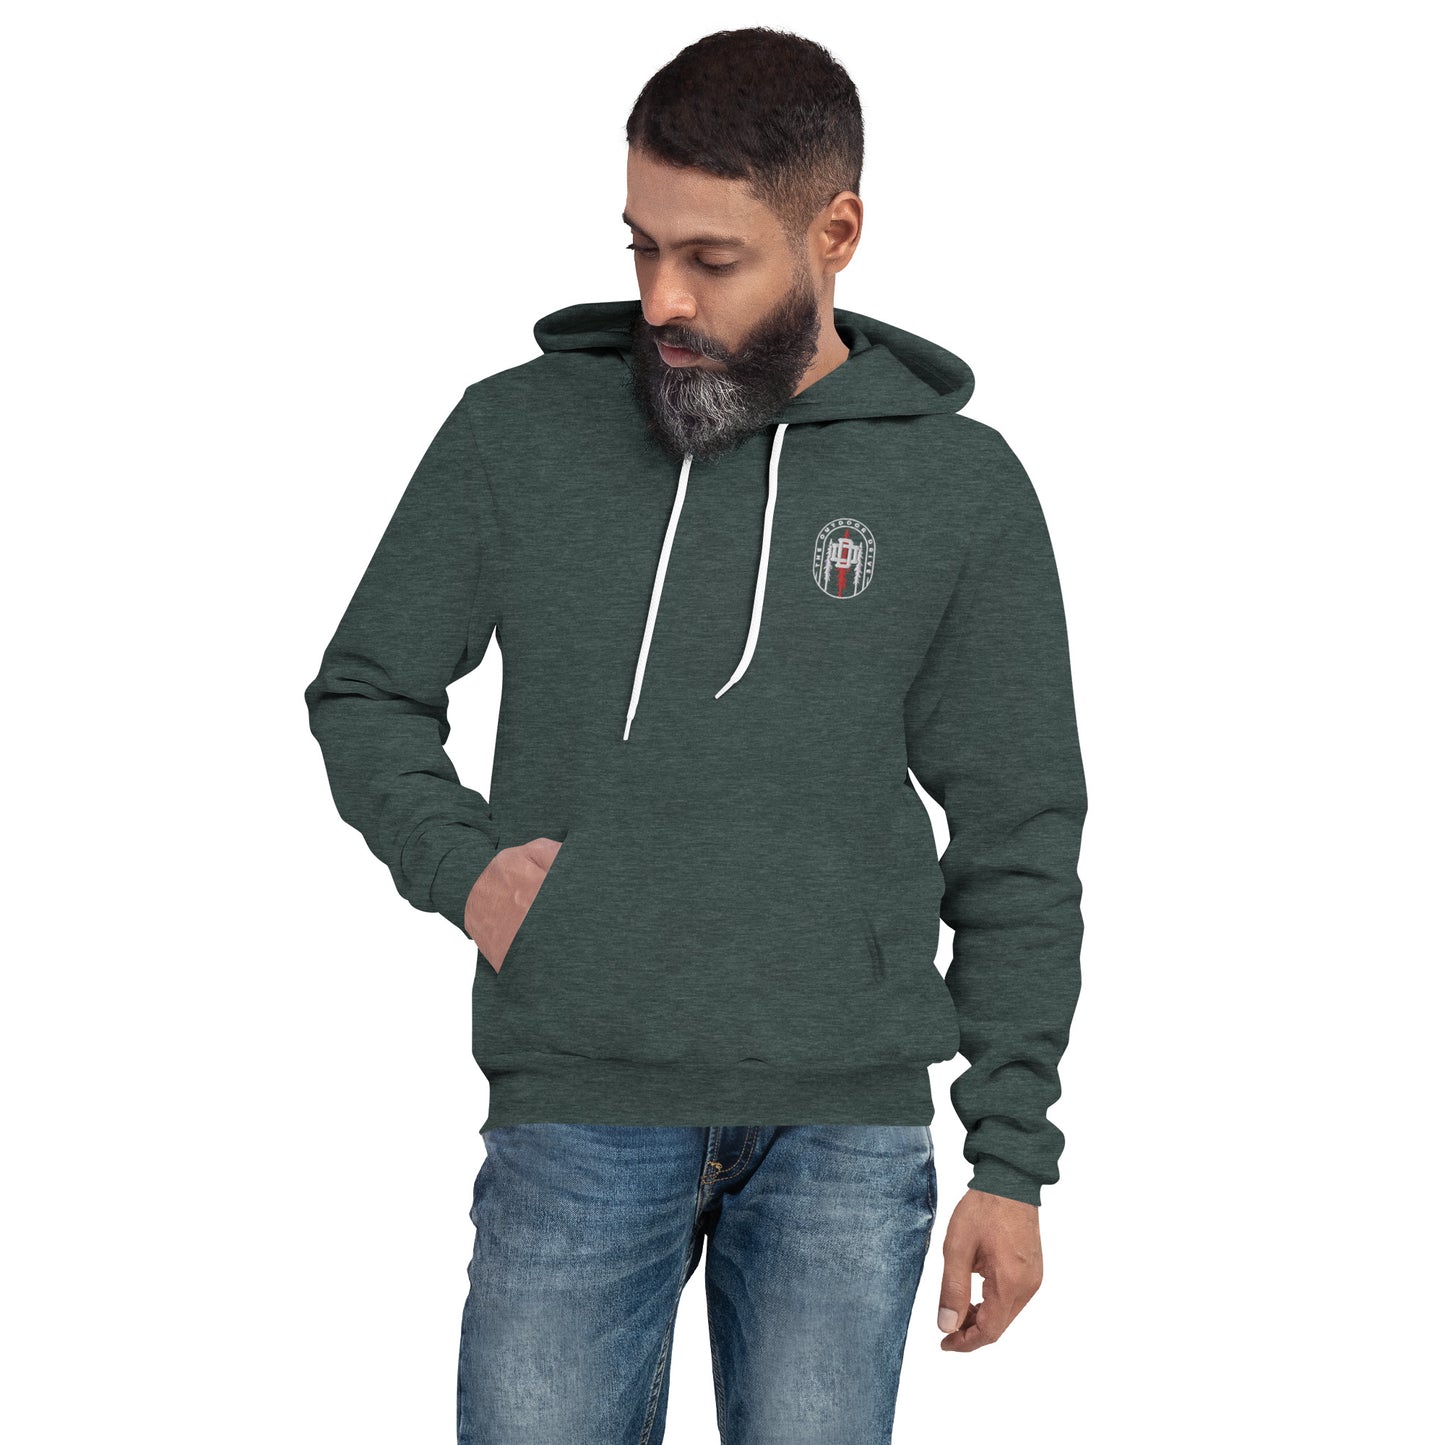 Embroidered Outdoor Drive hoodie